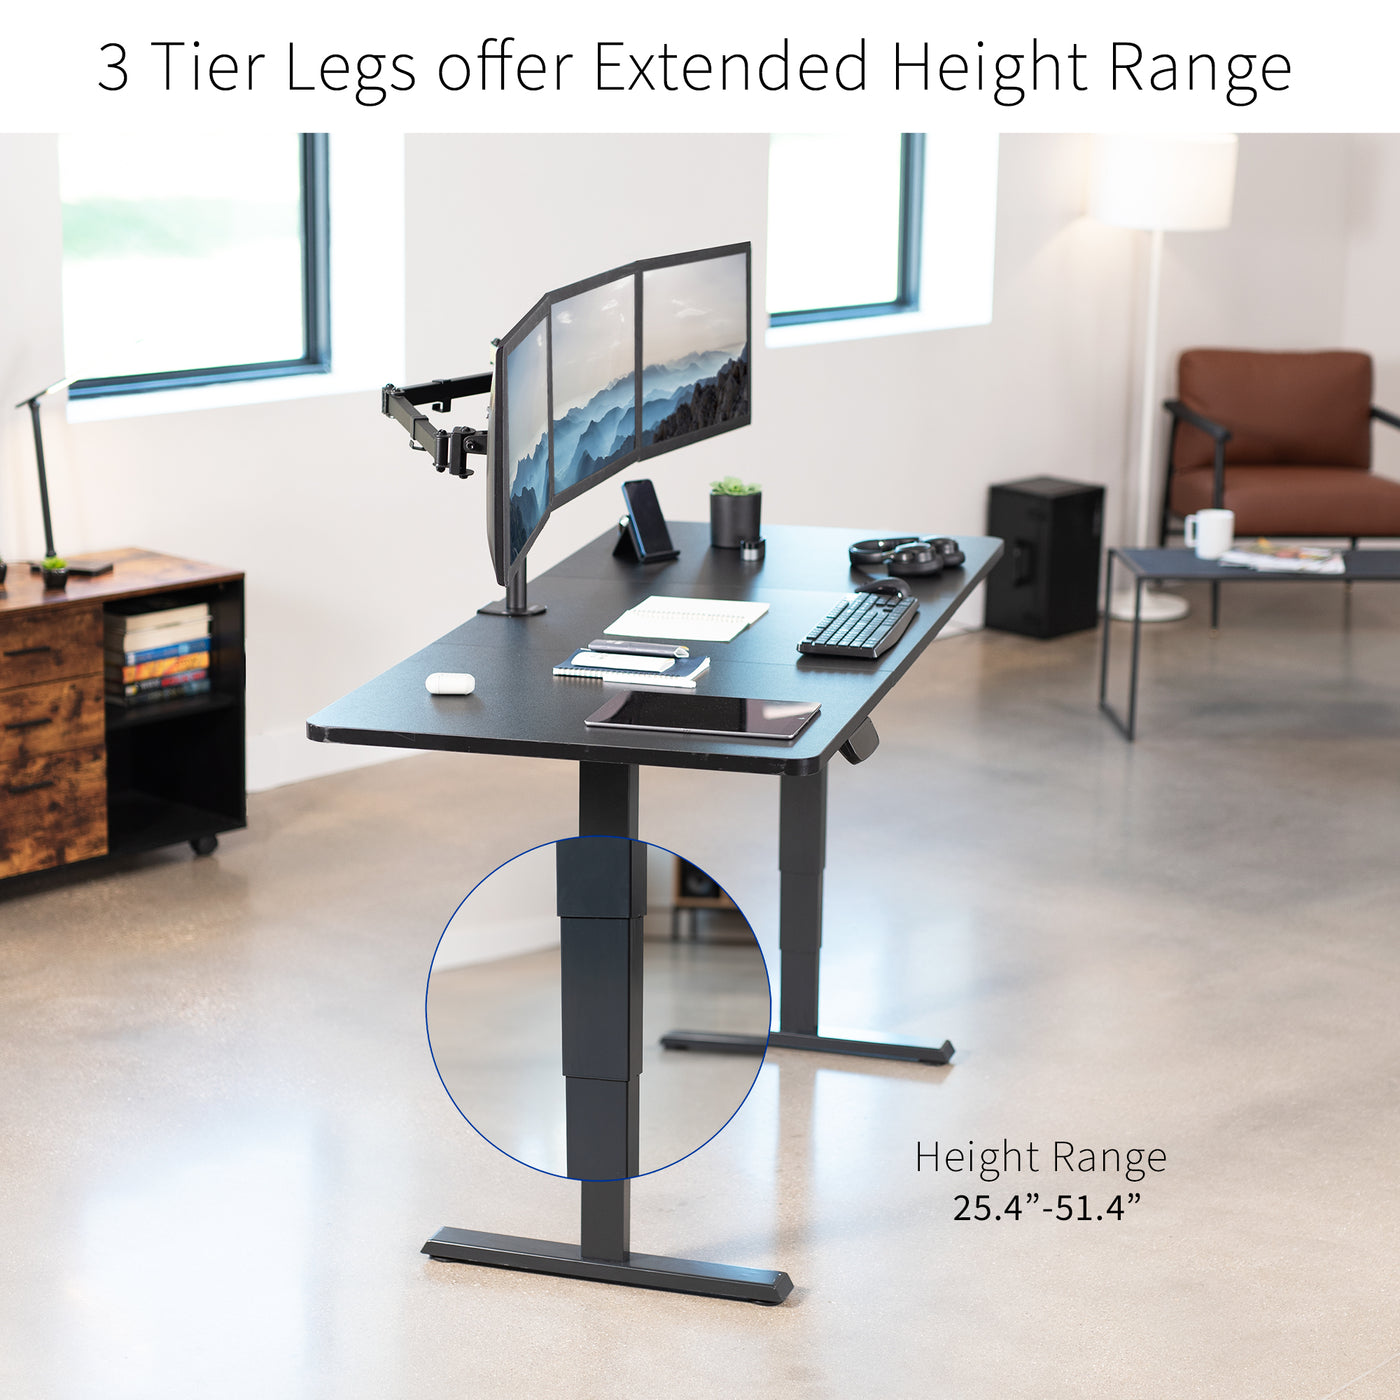 Large sturdy sit or stand active workstation with adjustable height and durable desk frame design and quiet motors.